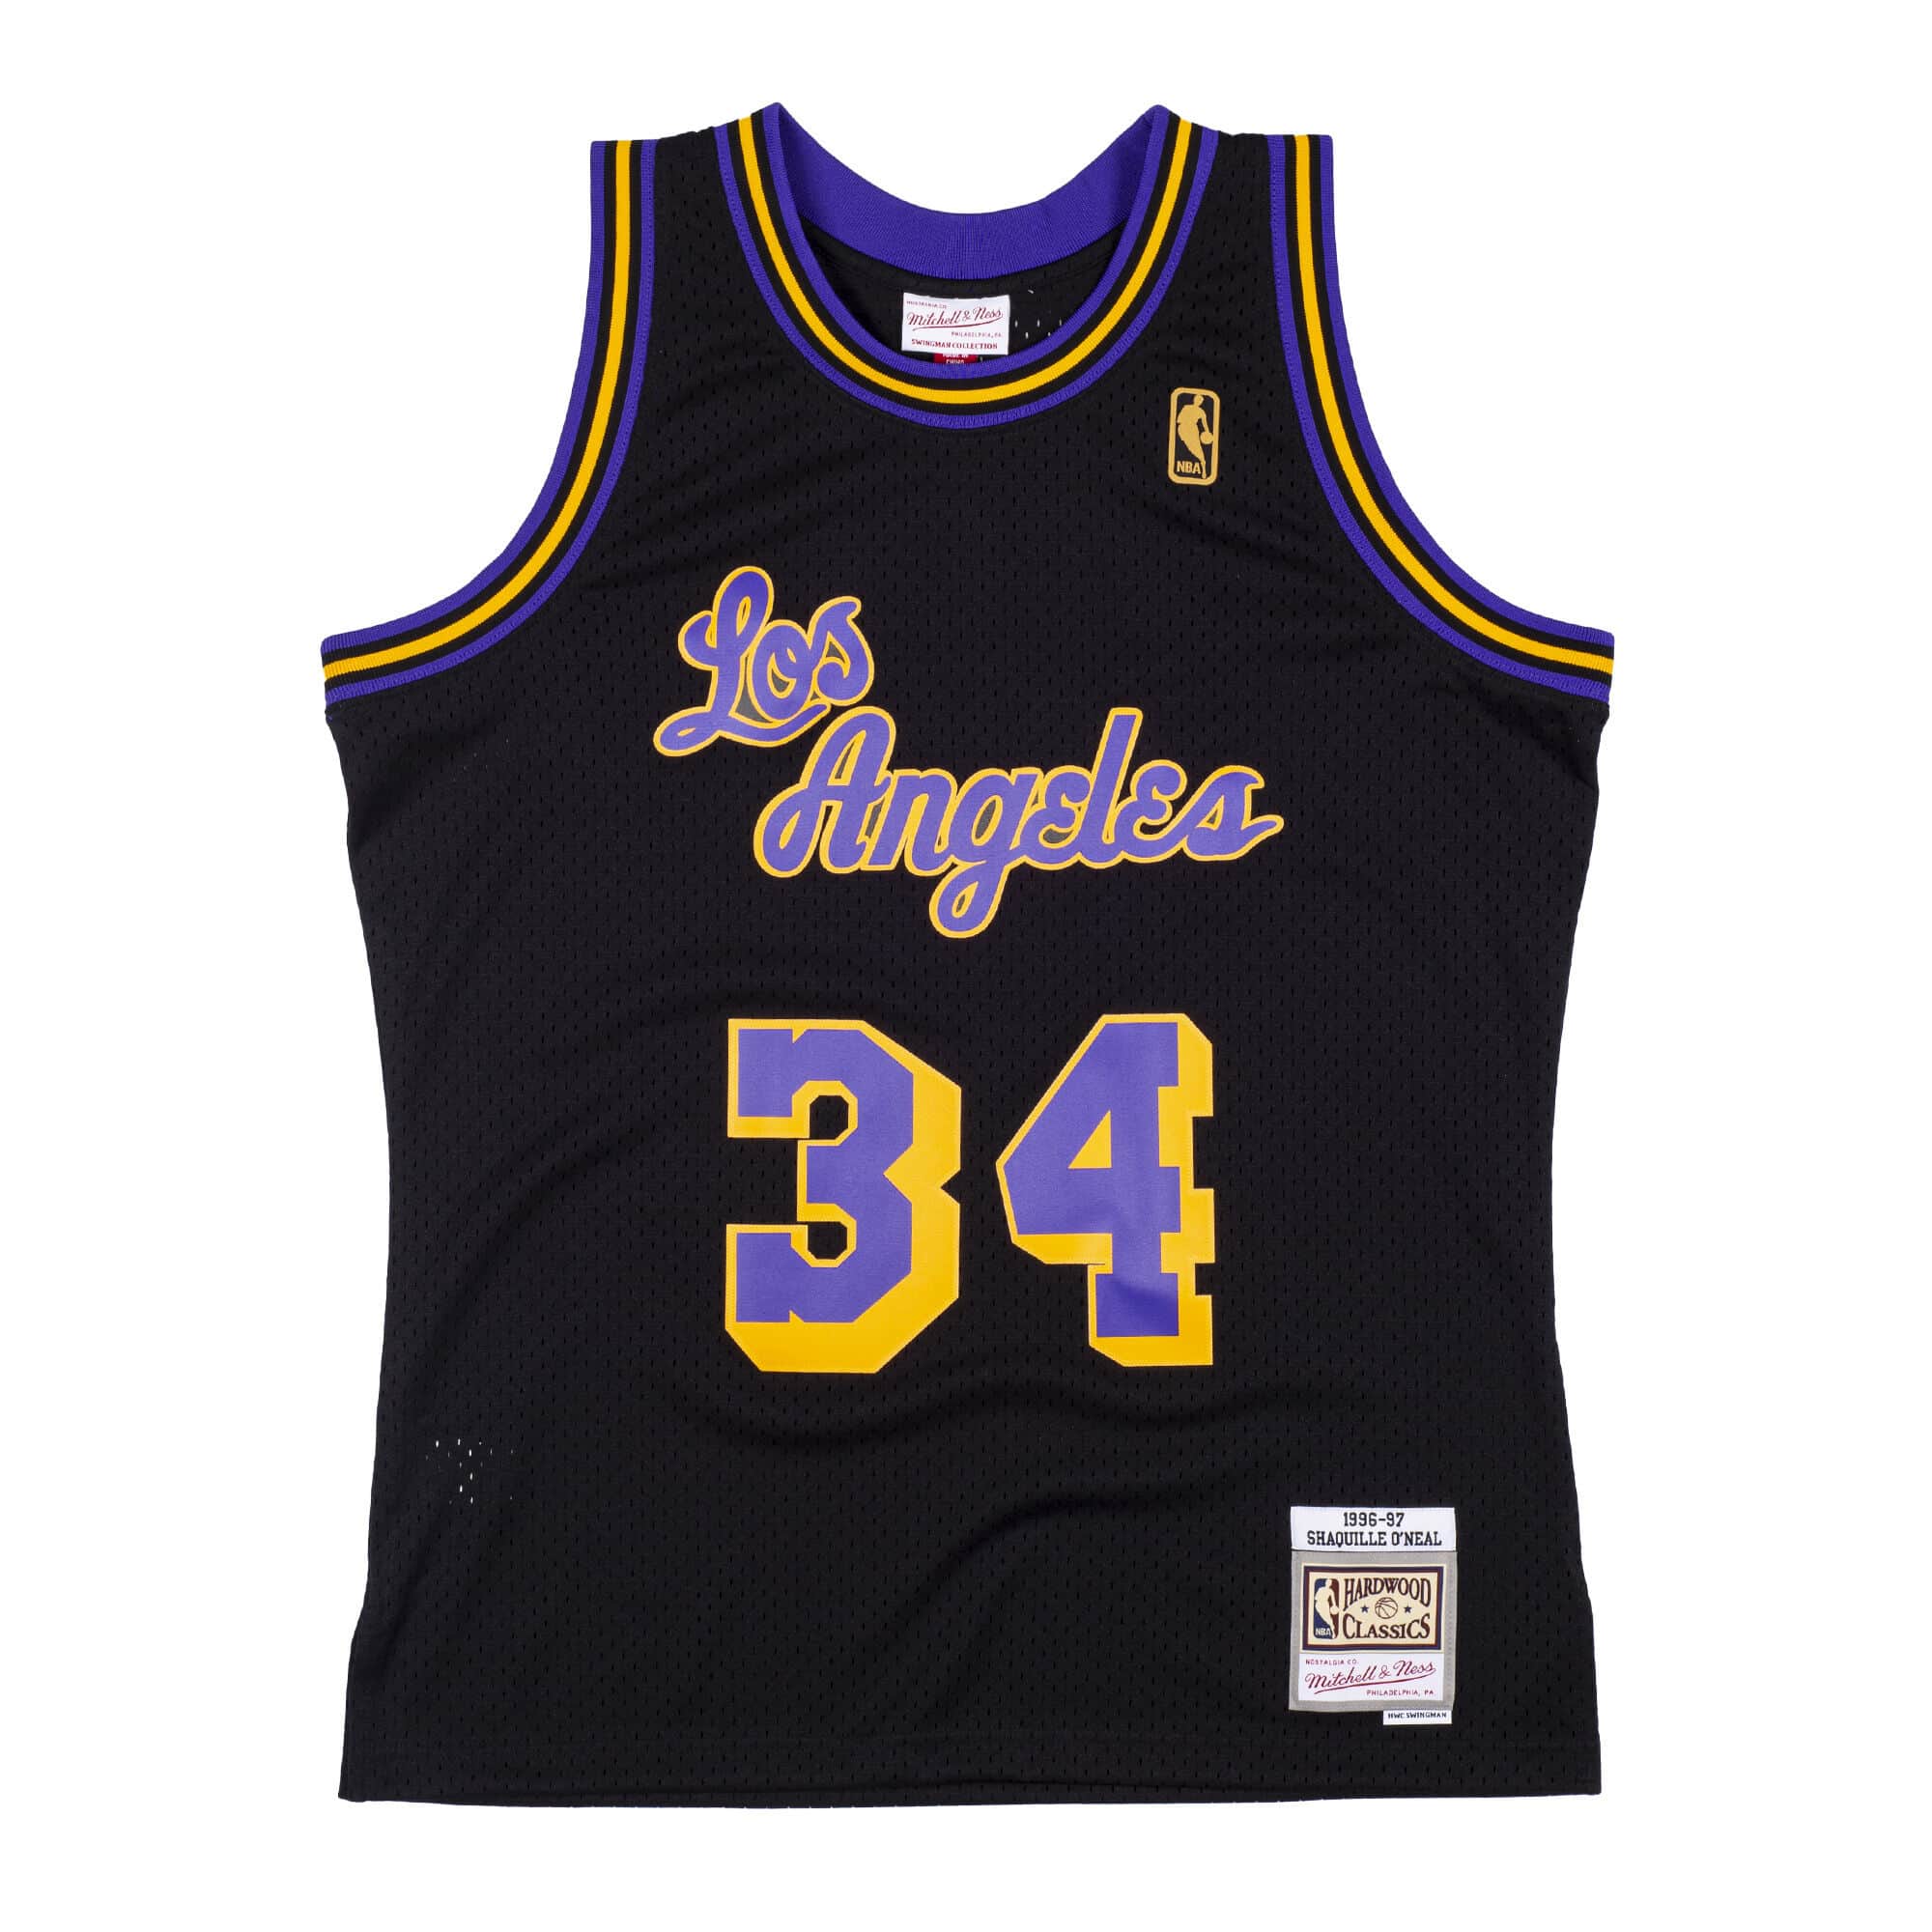 Shaquille O'Neal Signed Los Angeles Lakers Mitchell & Ness White & Blue  Stripe NBA Swingman Basketball Jersey